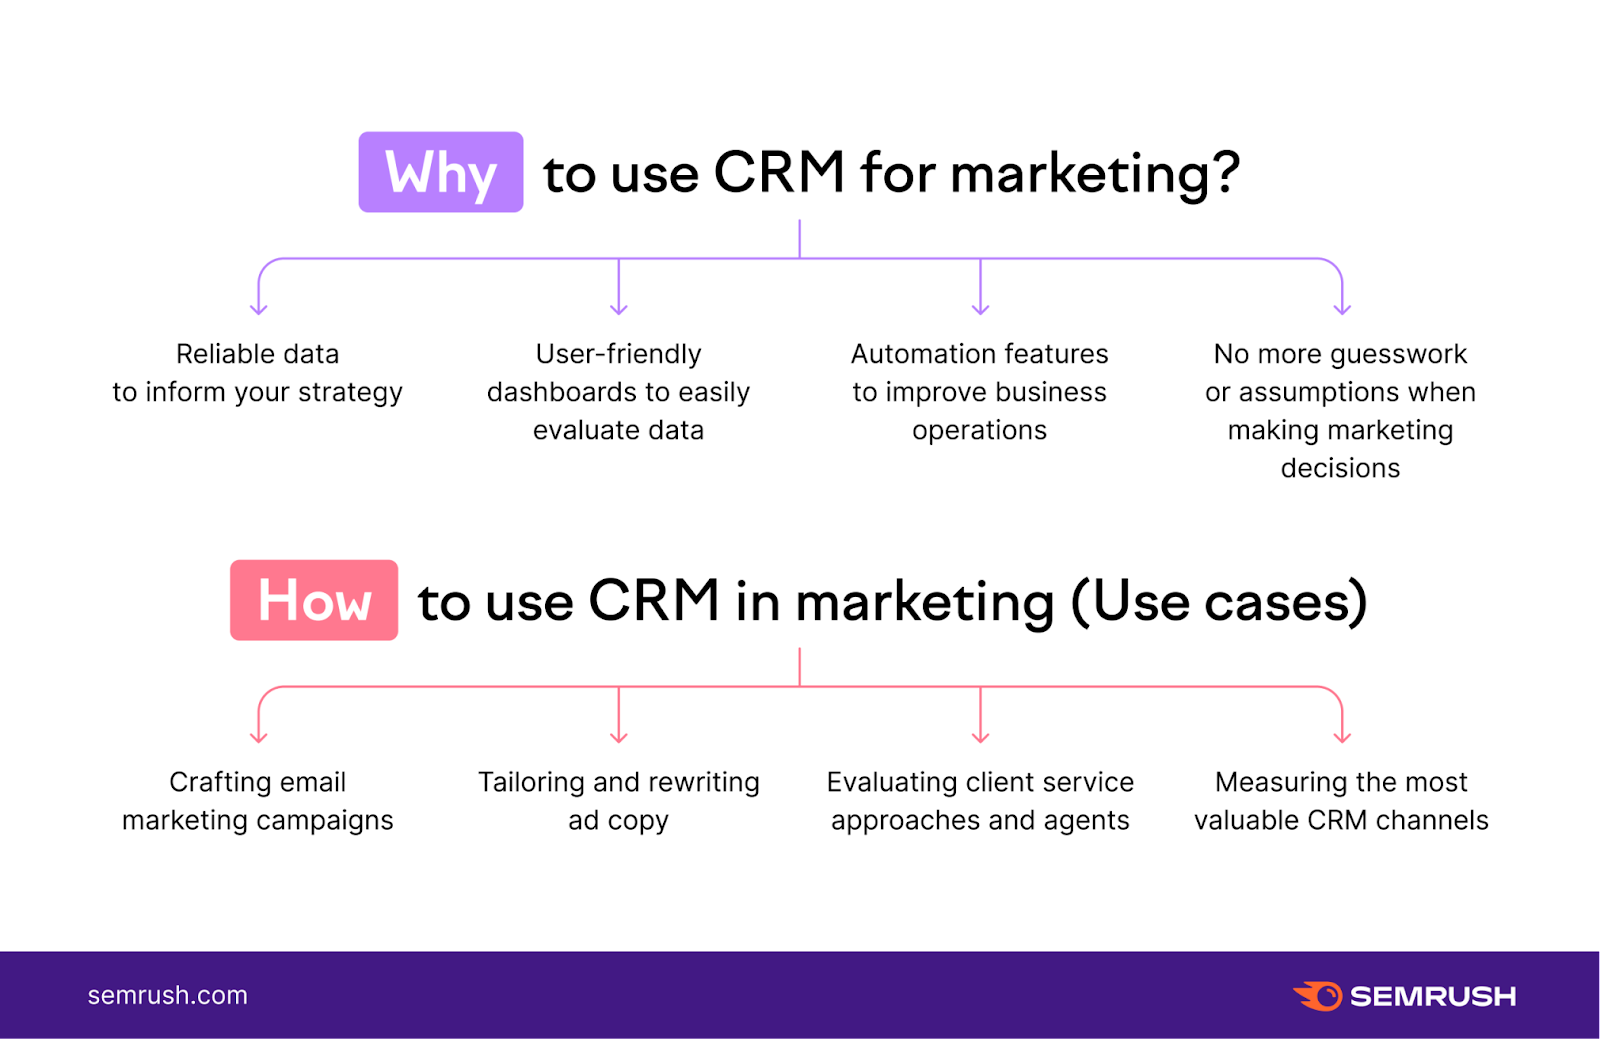 An image explaining why and how to use CRM for marketing